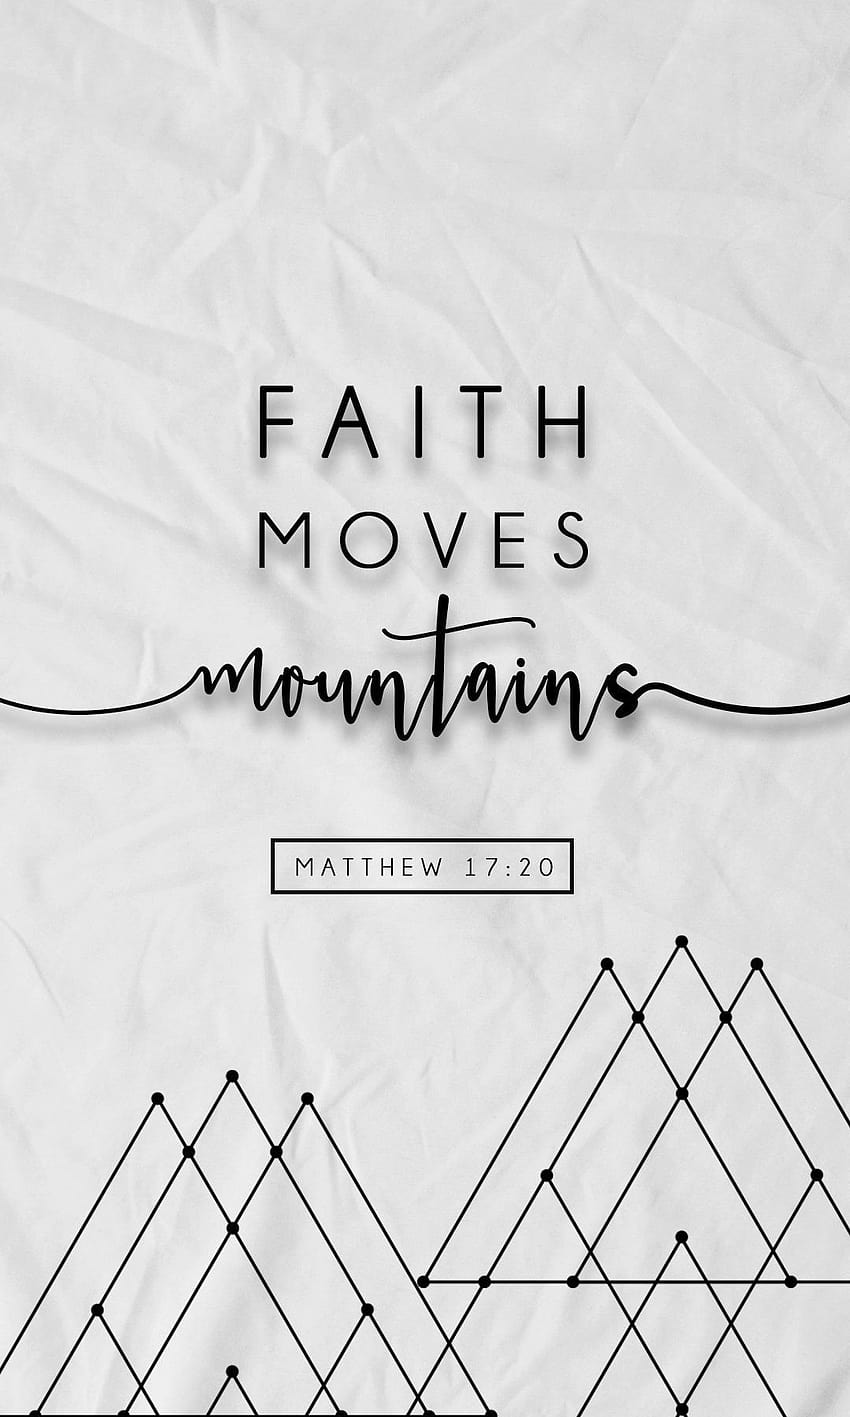 Inspiring Bible Verses posted by Zoey Cunningham, iphone bible verse HD phone wallpaper